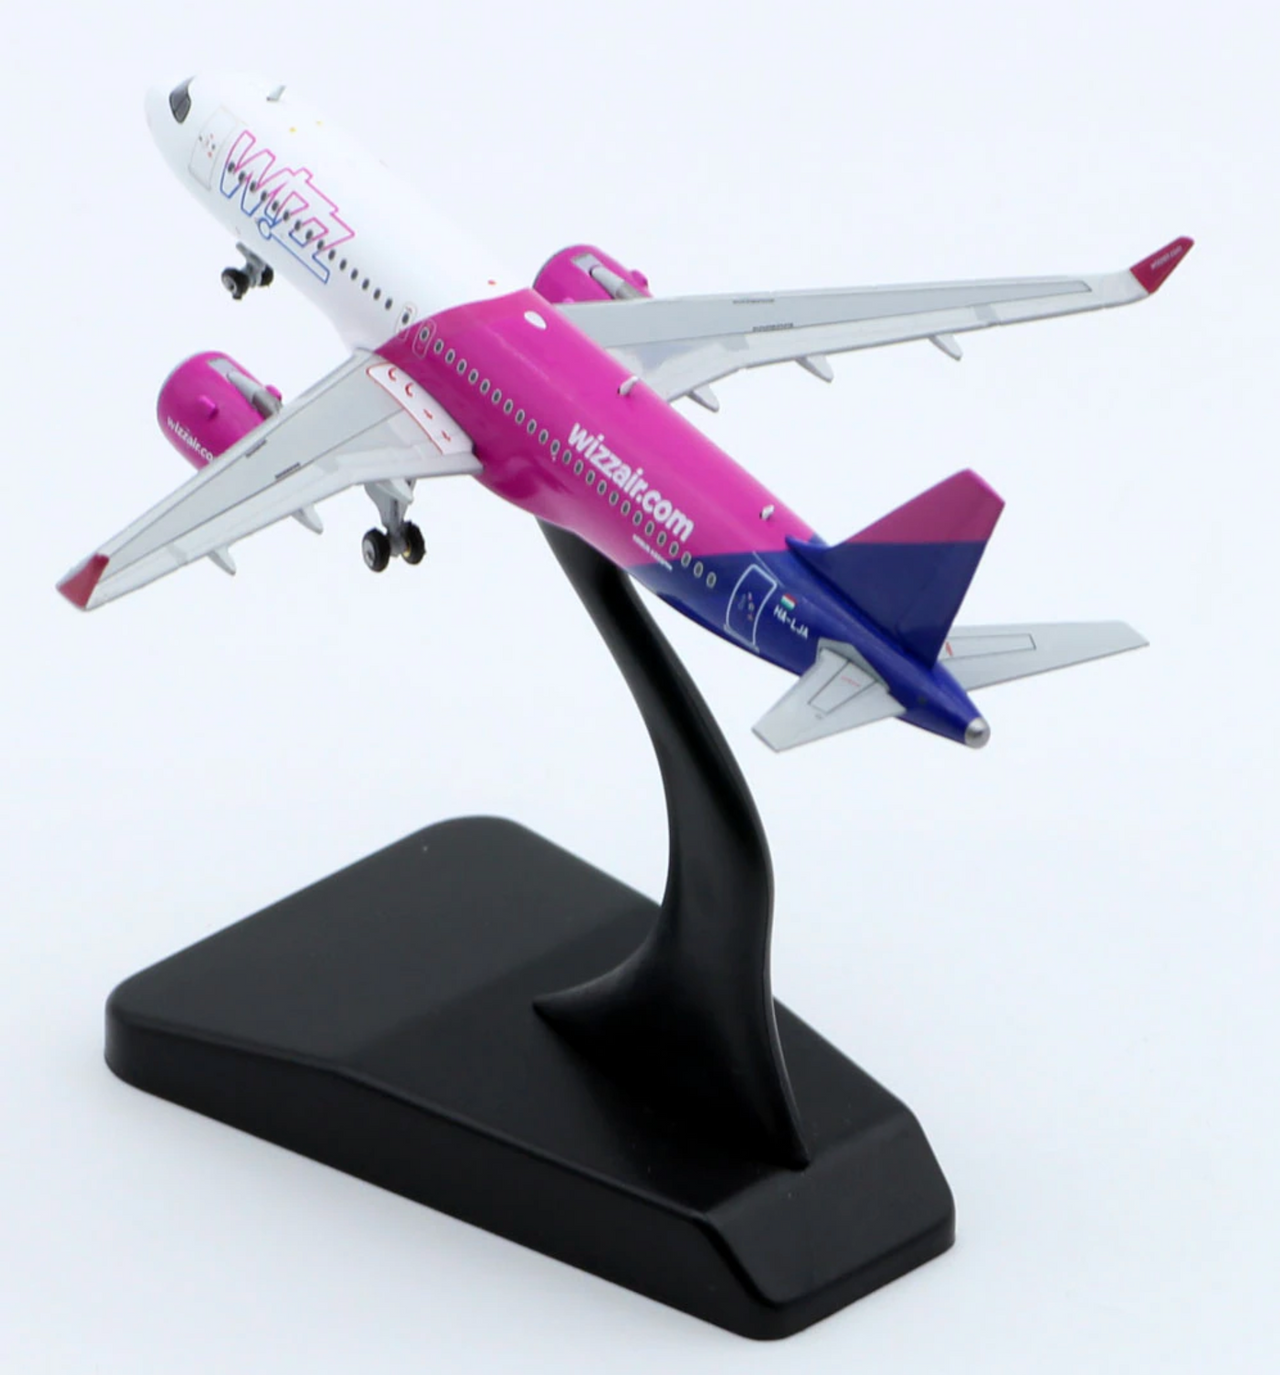 Wizz Air Airbus A320Neo 1/400 Scale Airplane Model